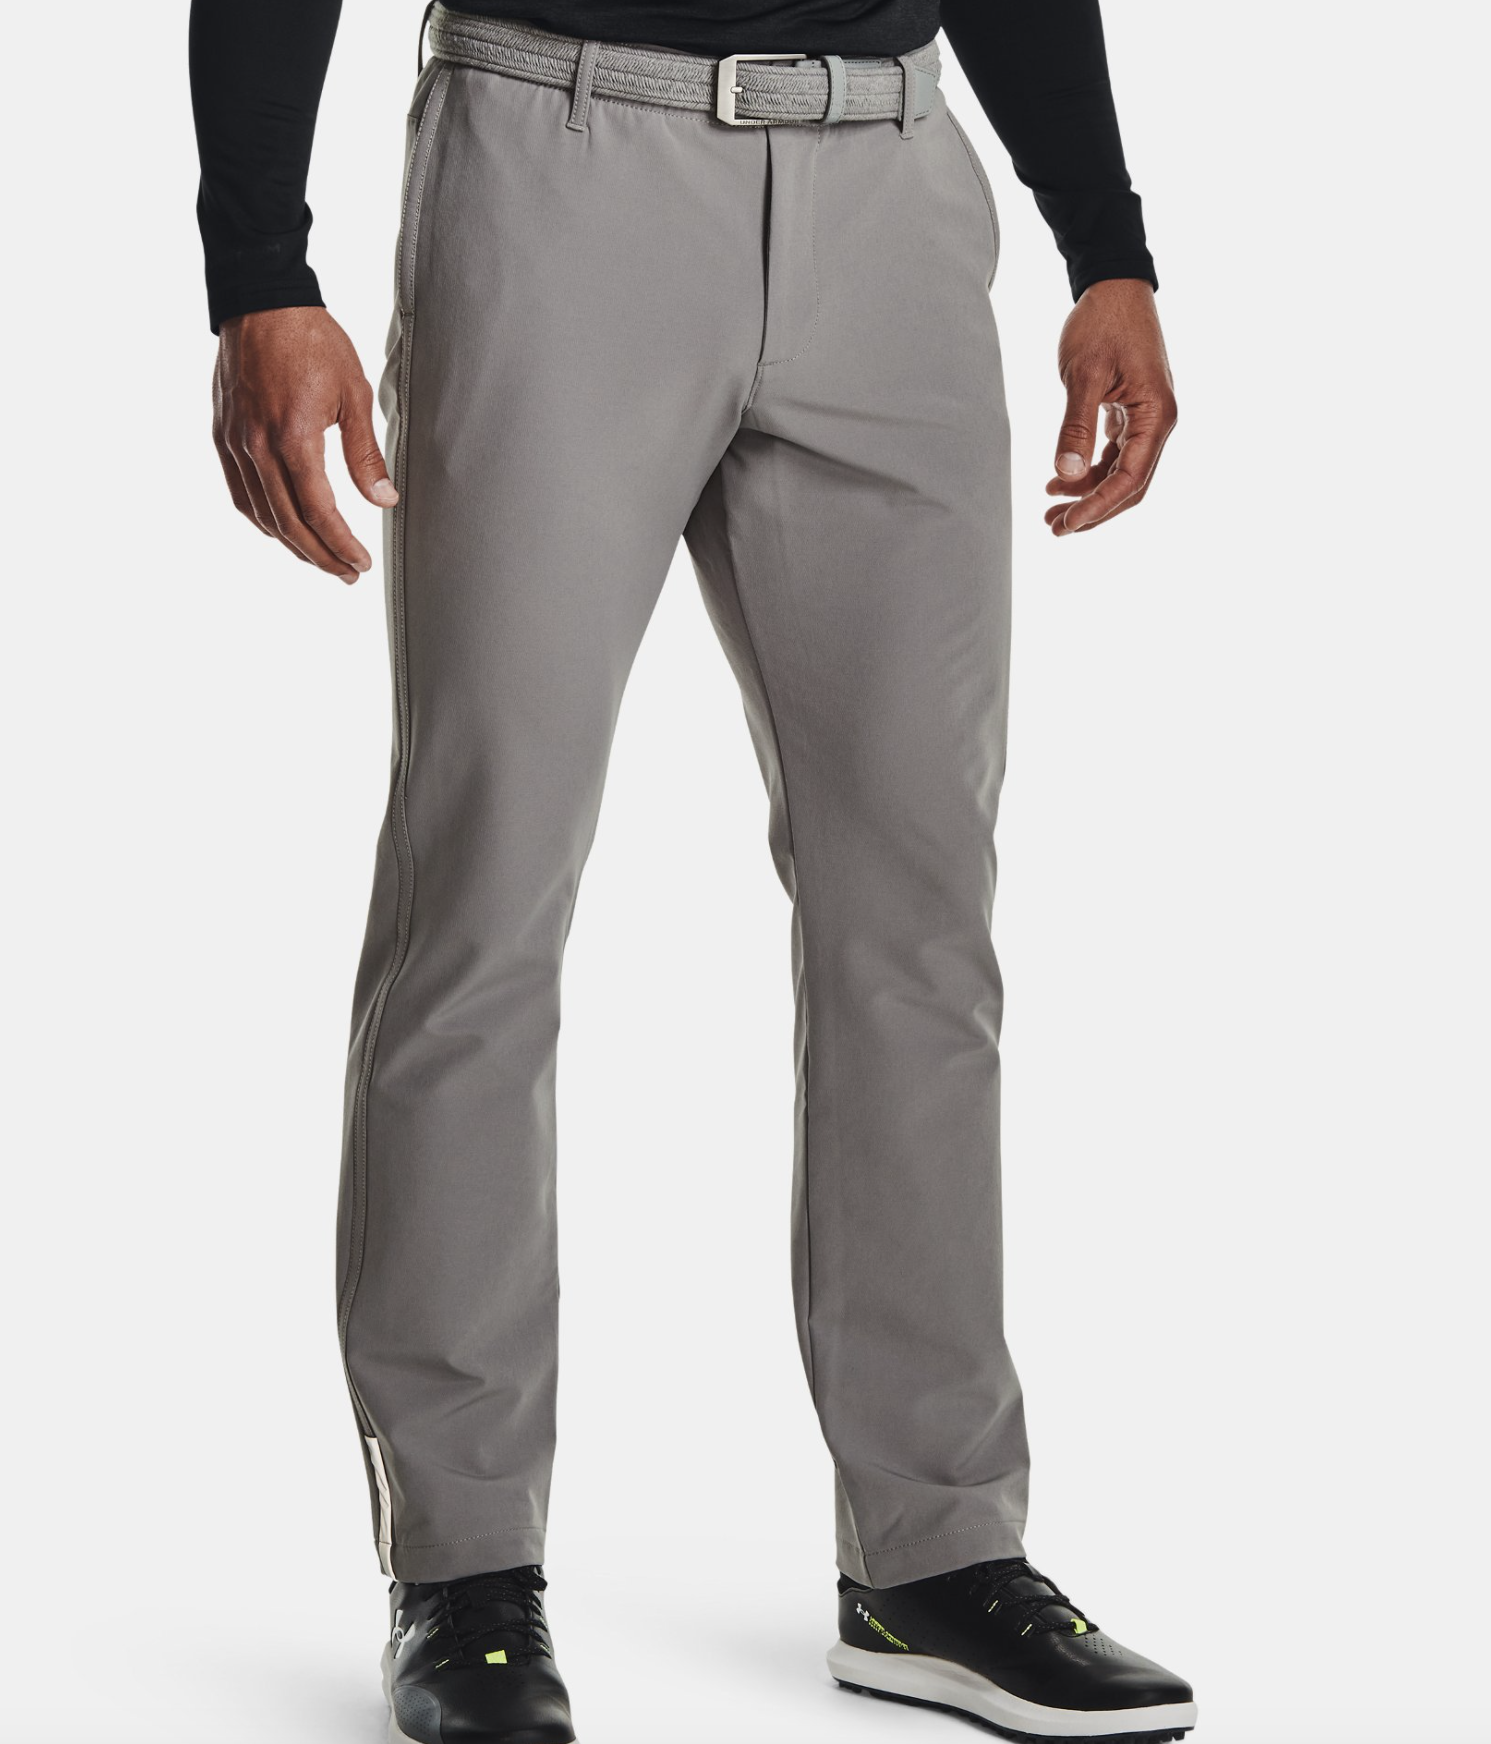 Men Thermal Plain Front Dress Pants Classic Winter Fleece Lined Insulated  Pants for Travelling Golf Business - Walmart.com